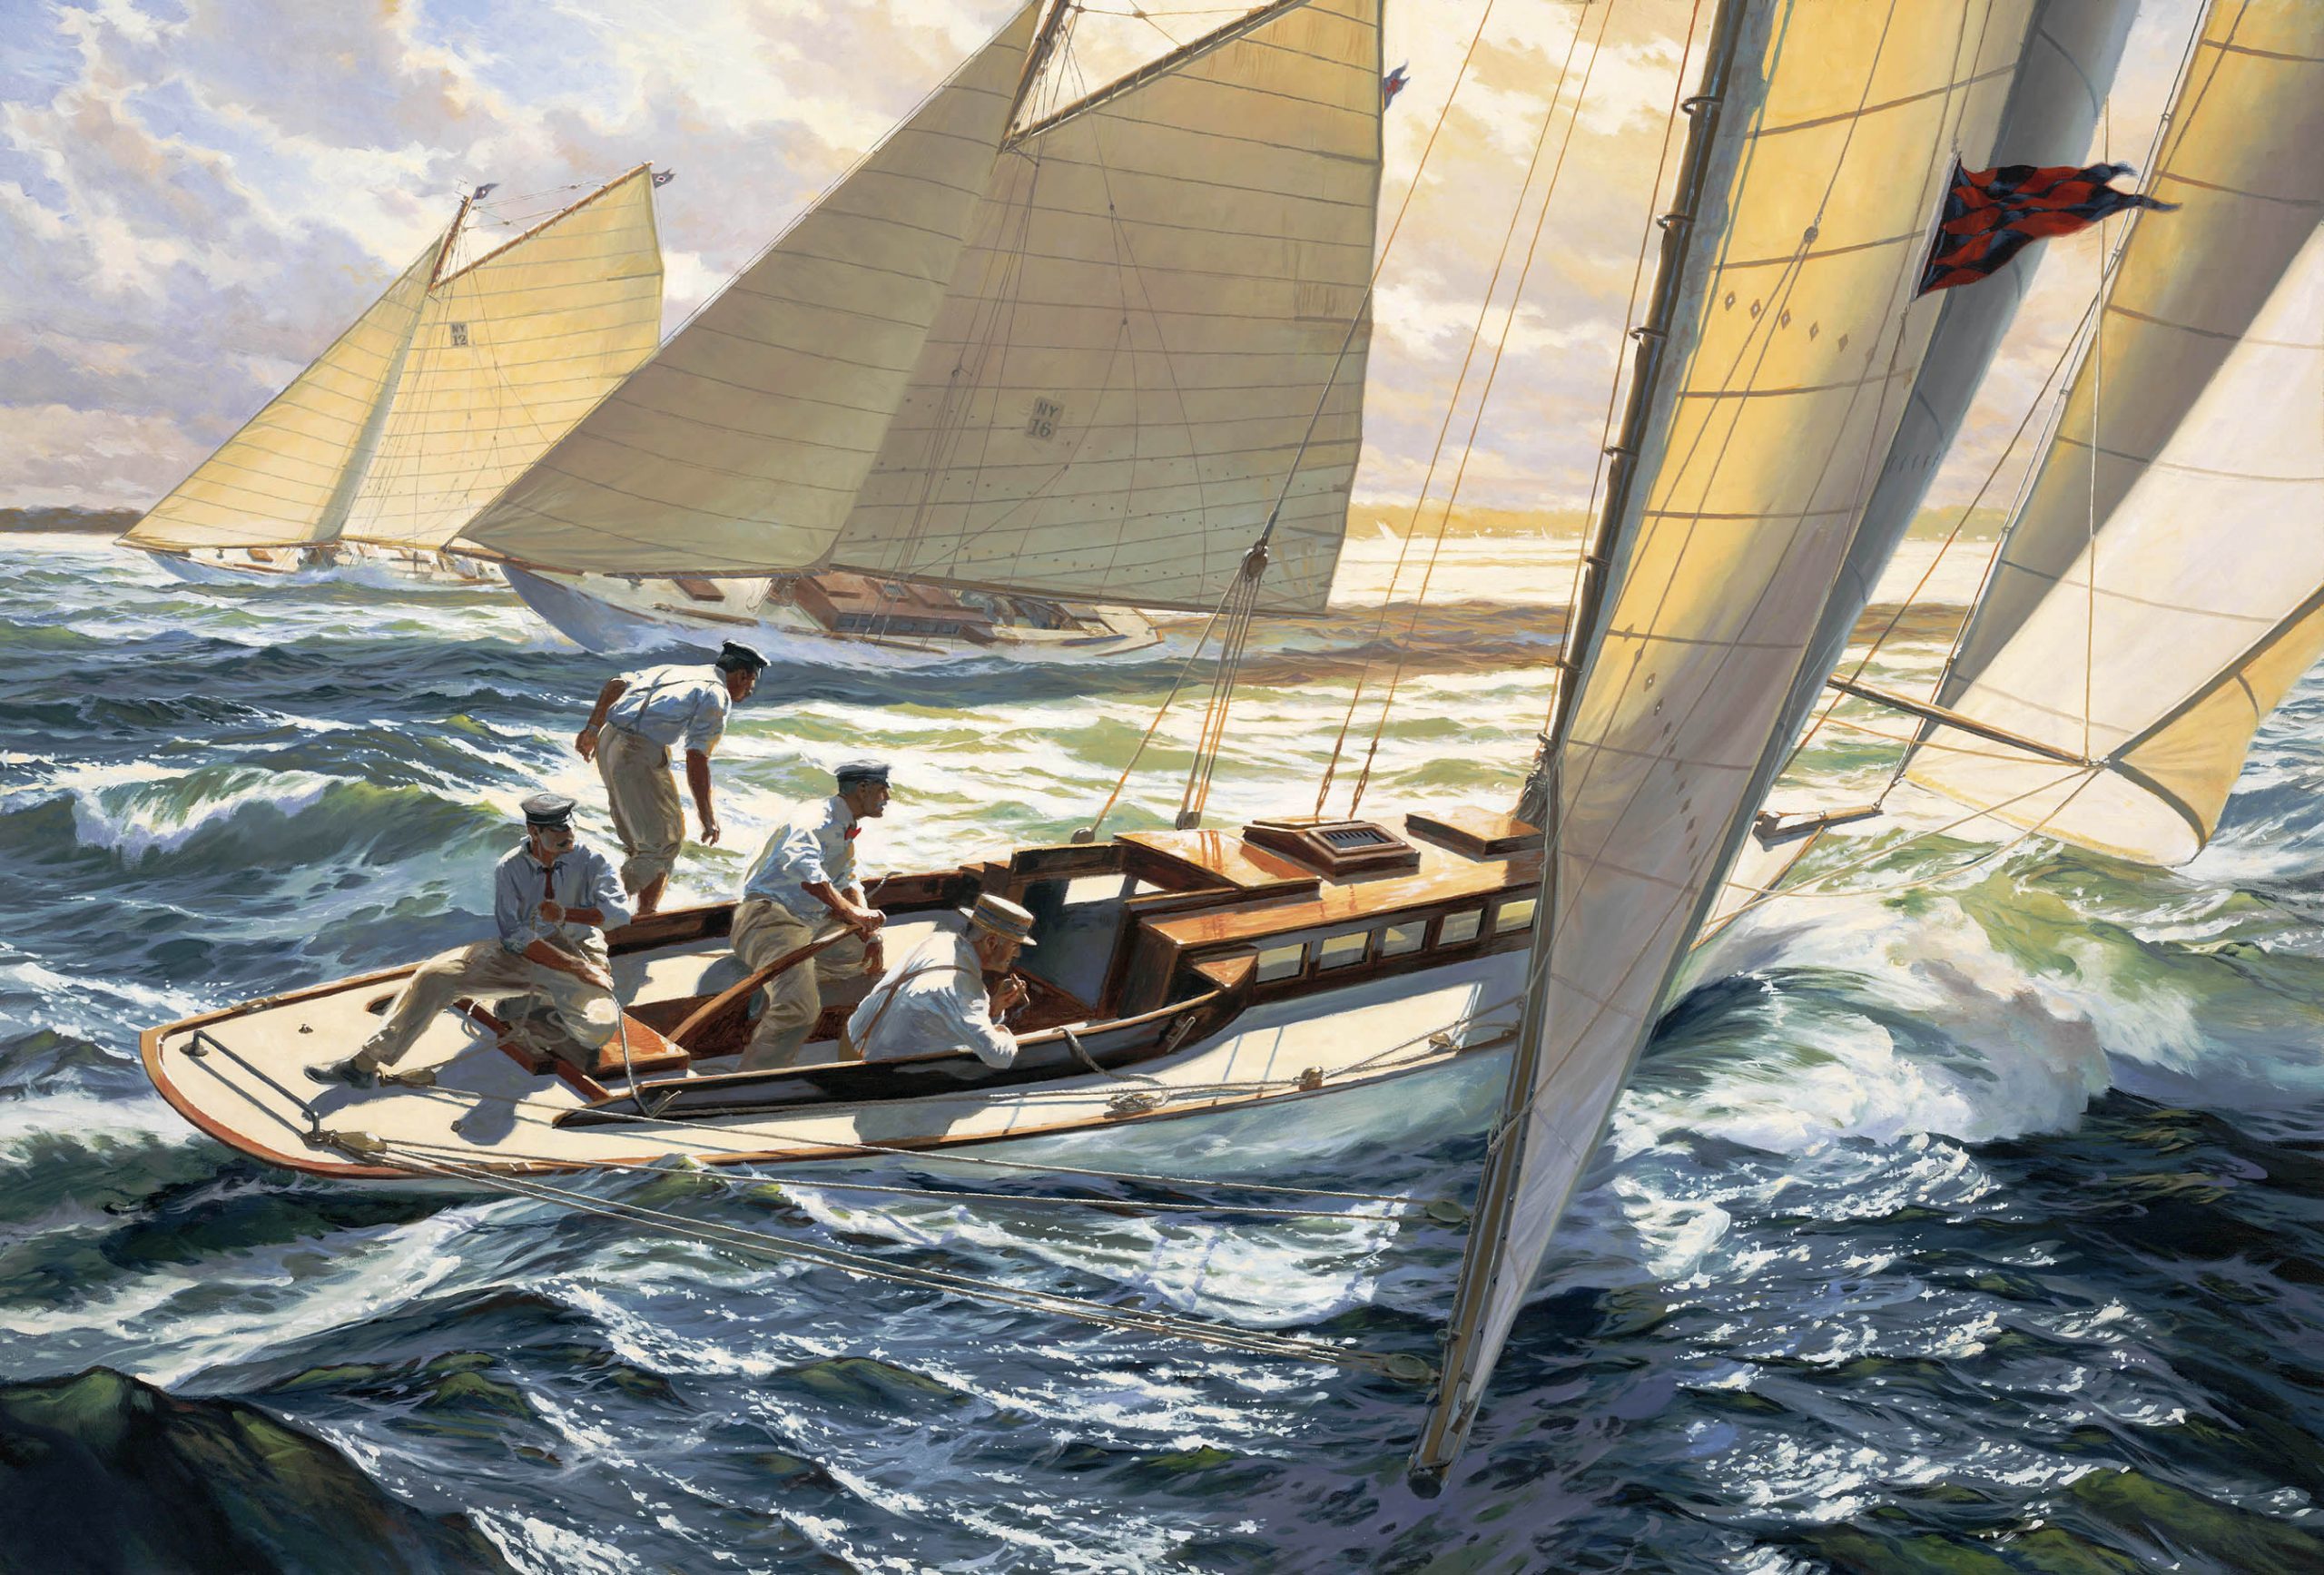 “The Joy of Sailing: CARA MIA and the New York 30s of 1905”